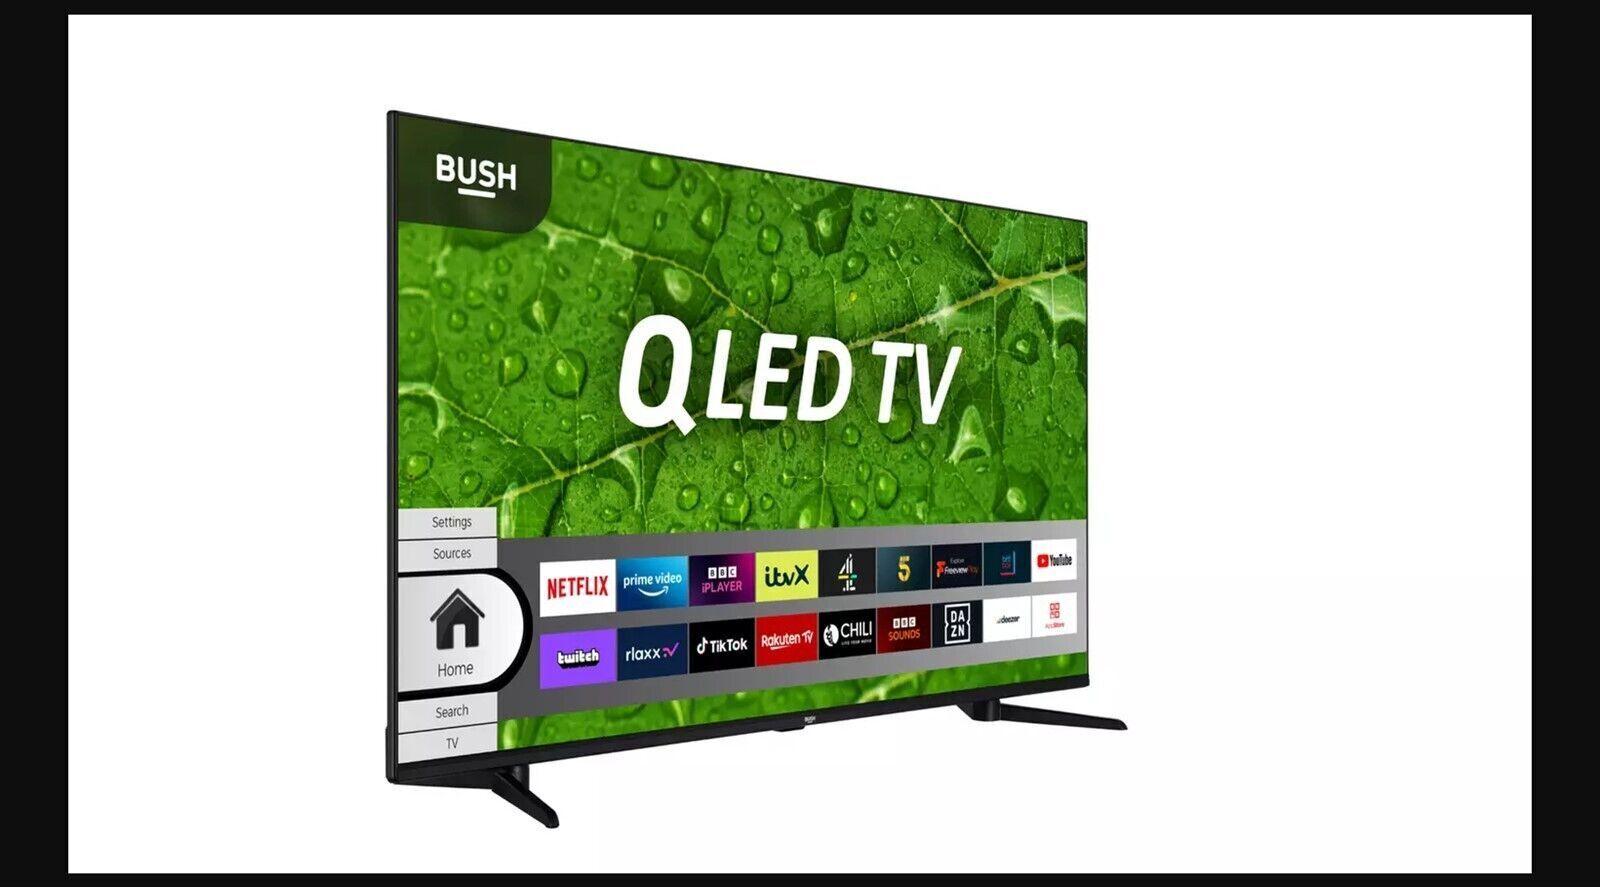 Bush 55 Inch QLED55UHDS Smart 4K UHD HDR QLED Freeview TV COLLECTION ONLY U - Smart Clear Vision